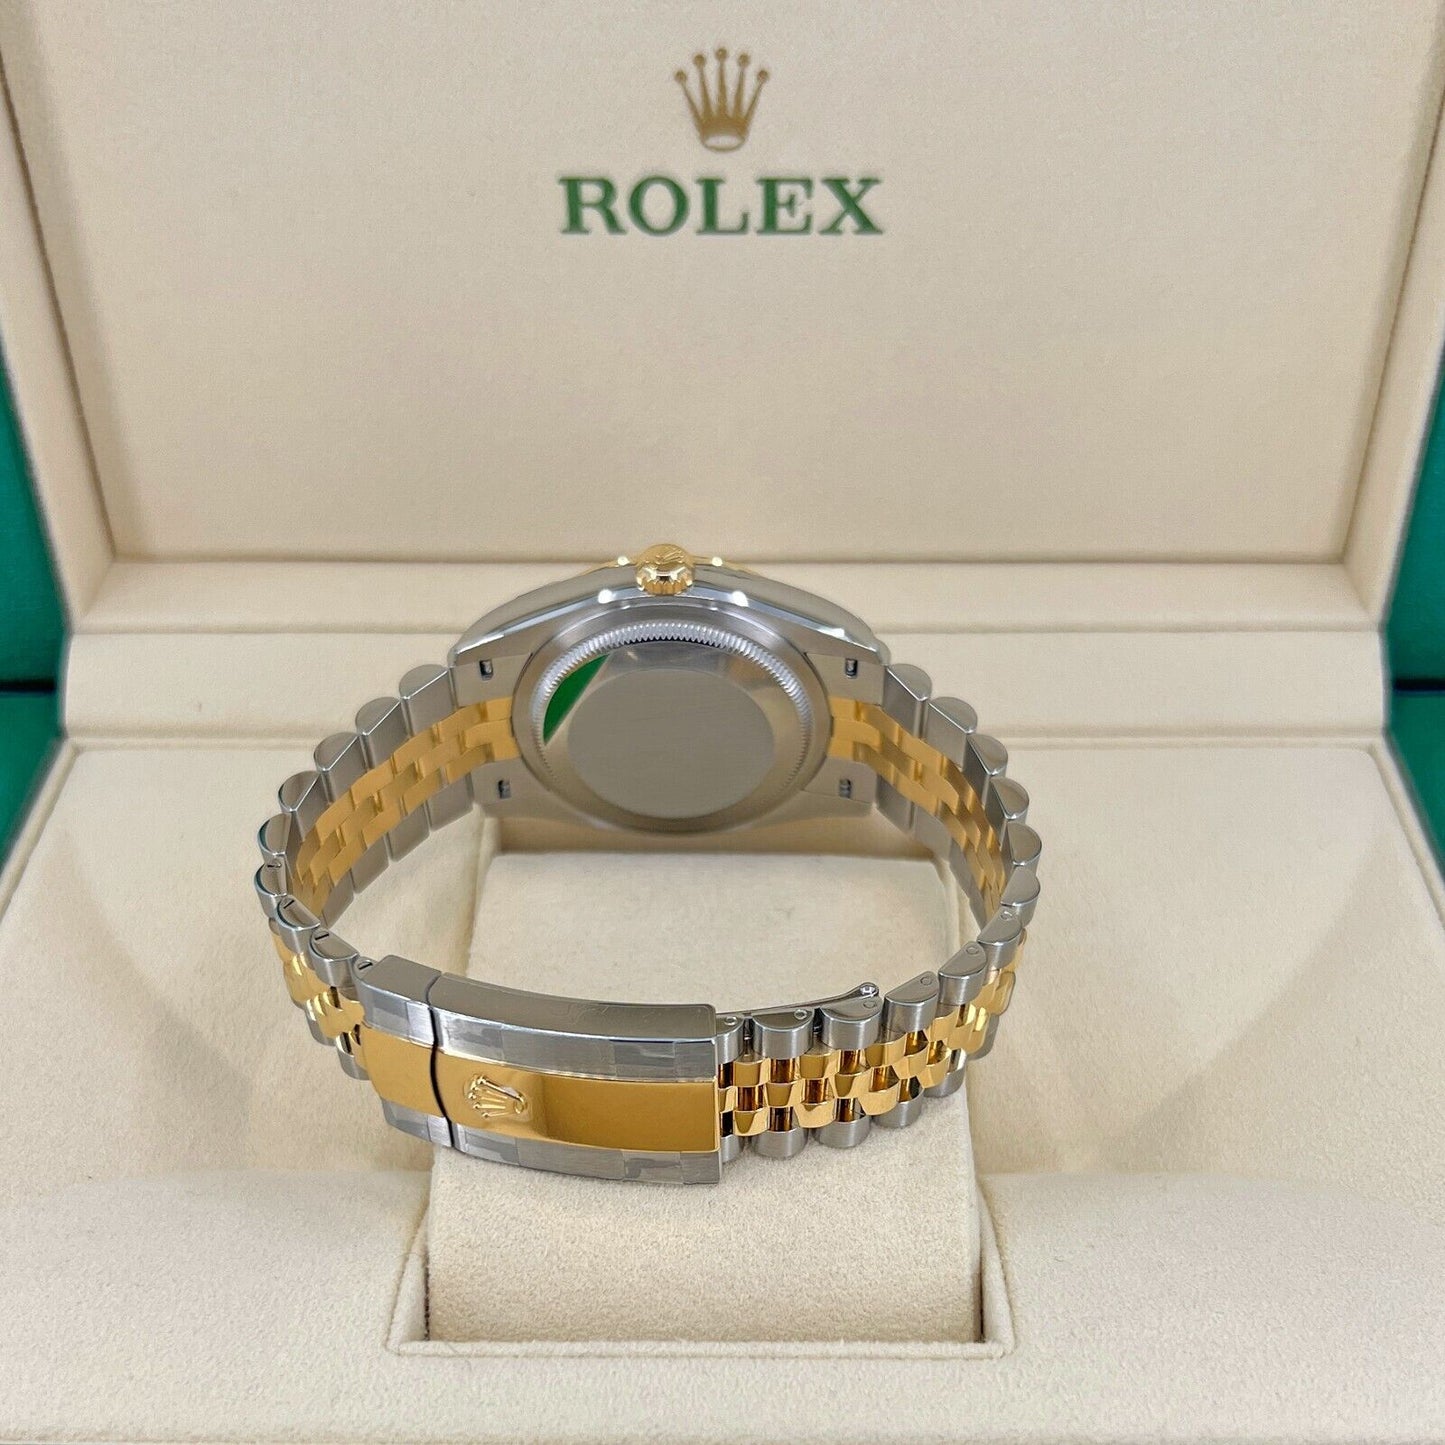 Rolex Datejust 36, 18k Yellow Gold and Stainless Steel, 36mm, Golden, palm motif dial, Ref# 126233-0037, Back